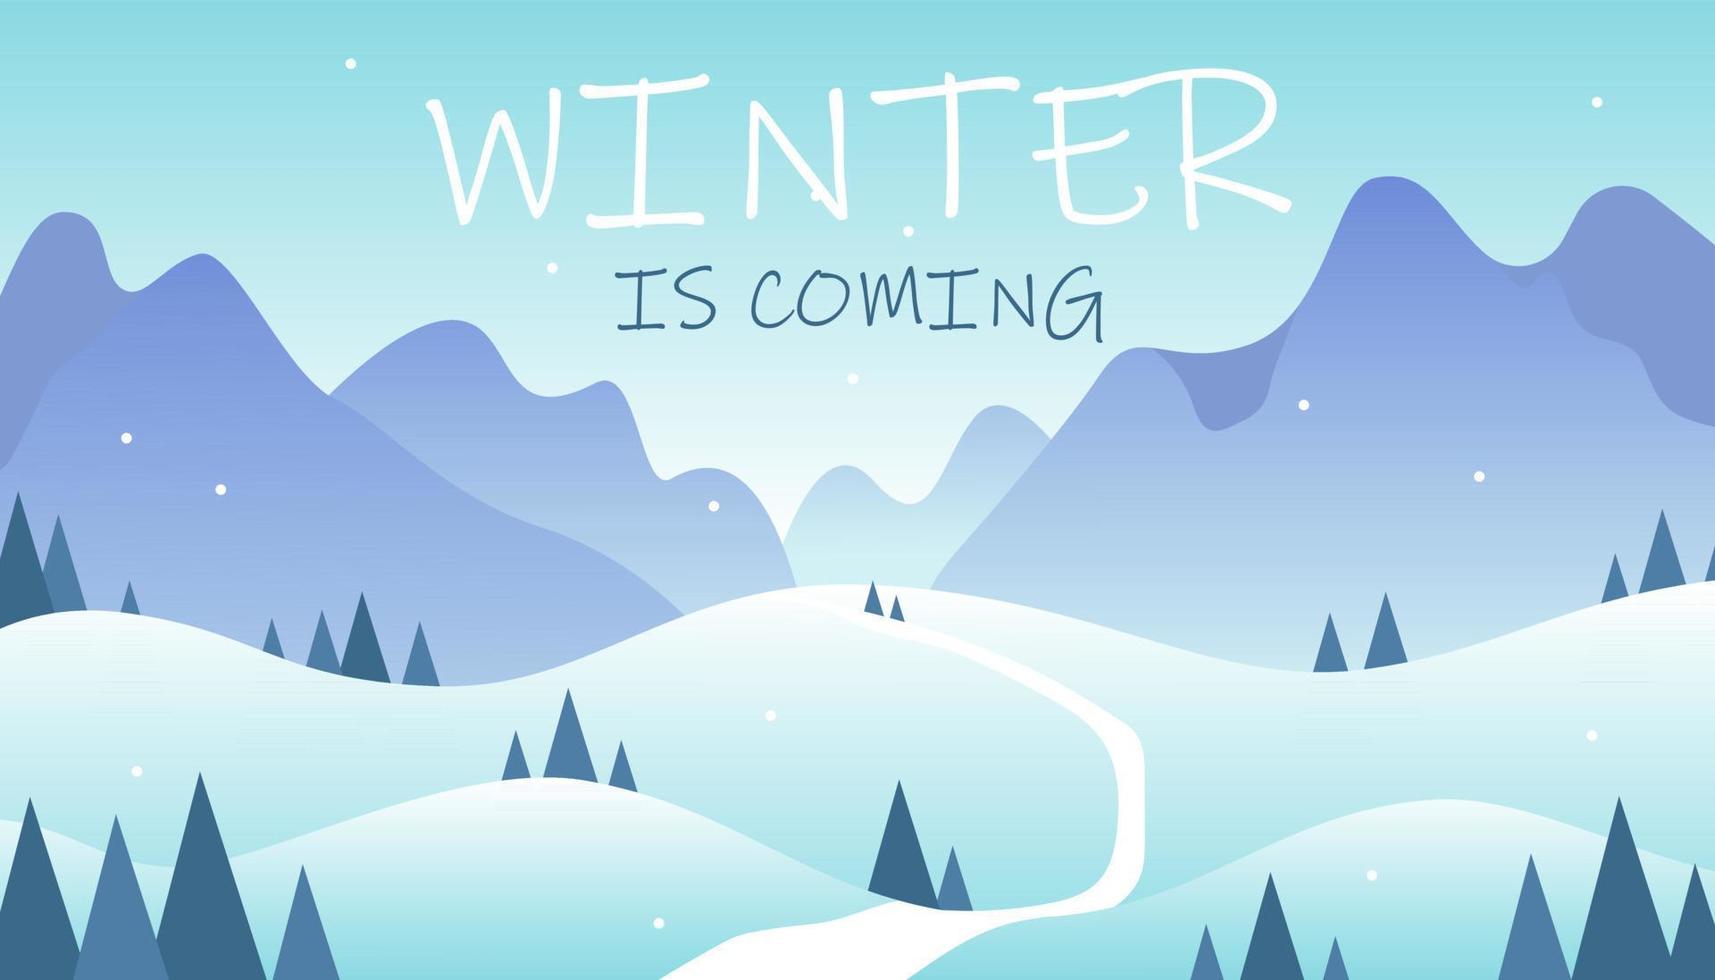 Horizontal flat winter landscape with mountains, road, trees and winter is coming lettering. Vector winter illustration background.